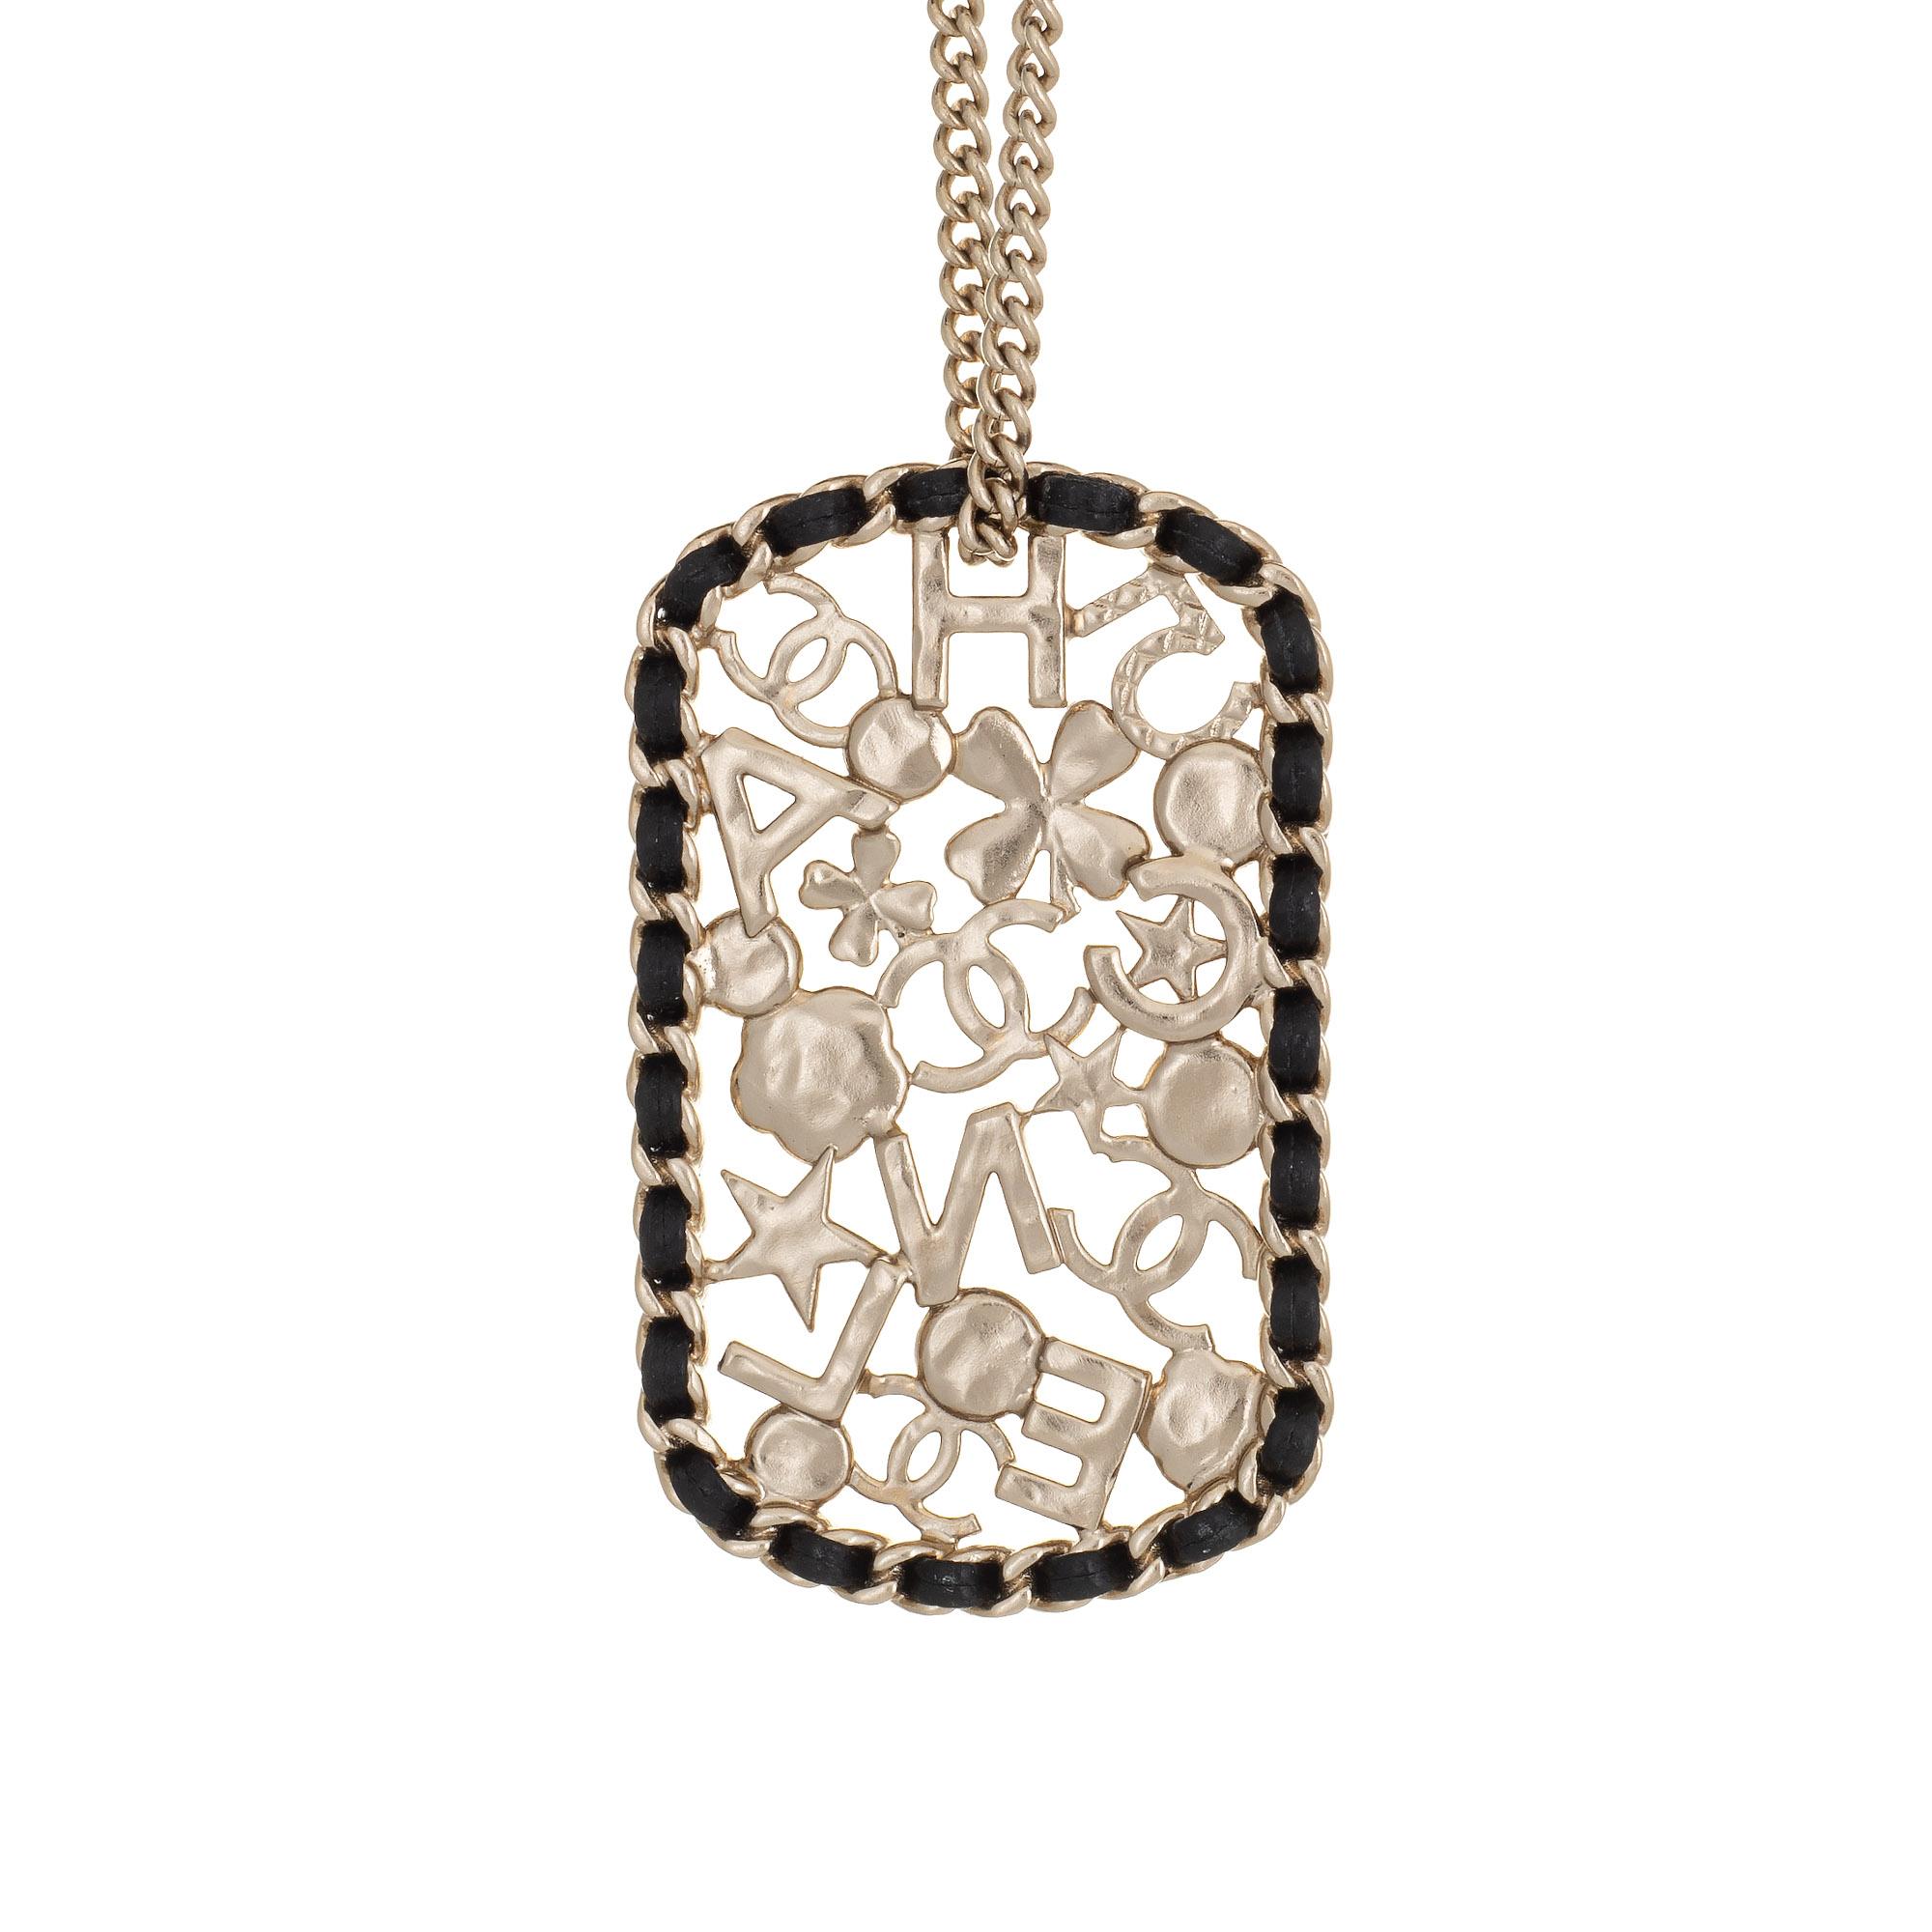 Pre-owned Chanel pendant necklace crafted in light yellow gold-tone (circa 2020). 

The large square pendant features a mosaic of CC logos, camellia, clover, 5, star, and crystal 